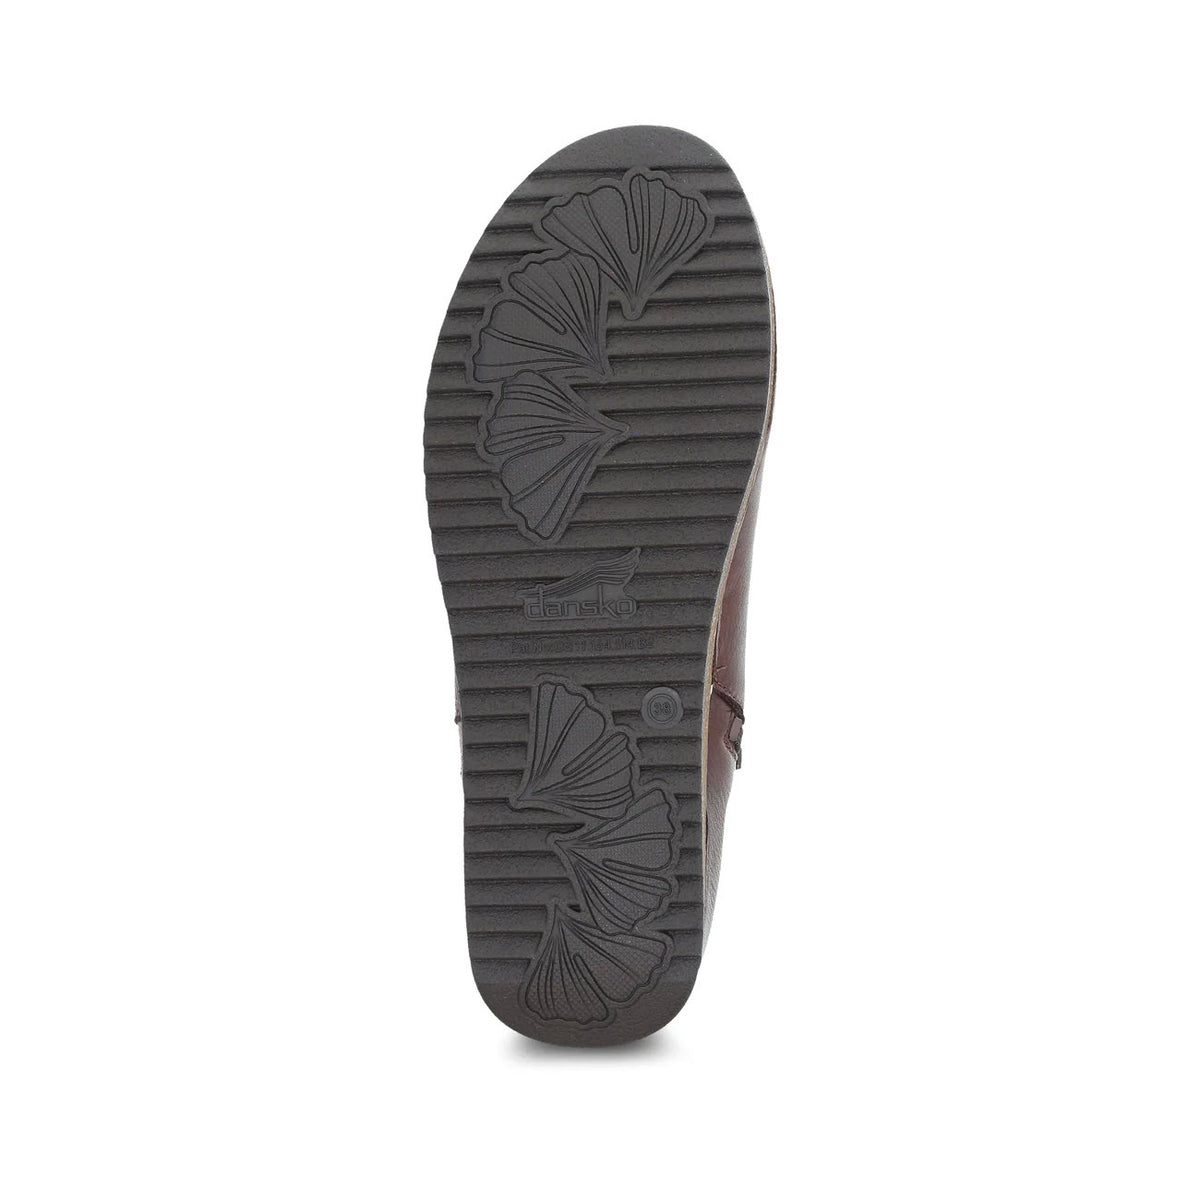 Bottom view of a single Dansko Makara bootie showing tread pattern with floral designs and the Dansko logo visible.